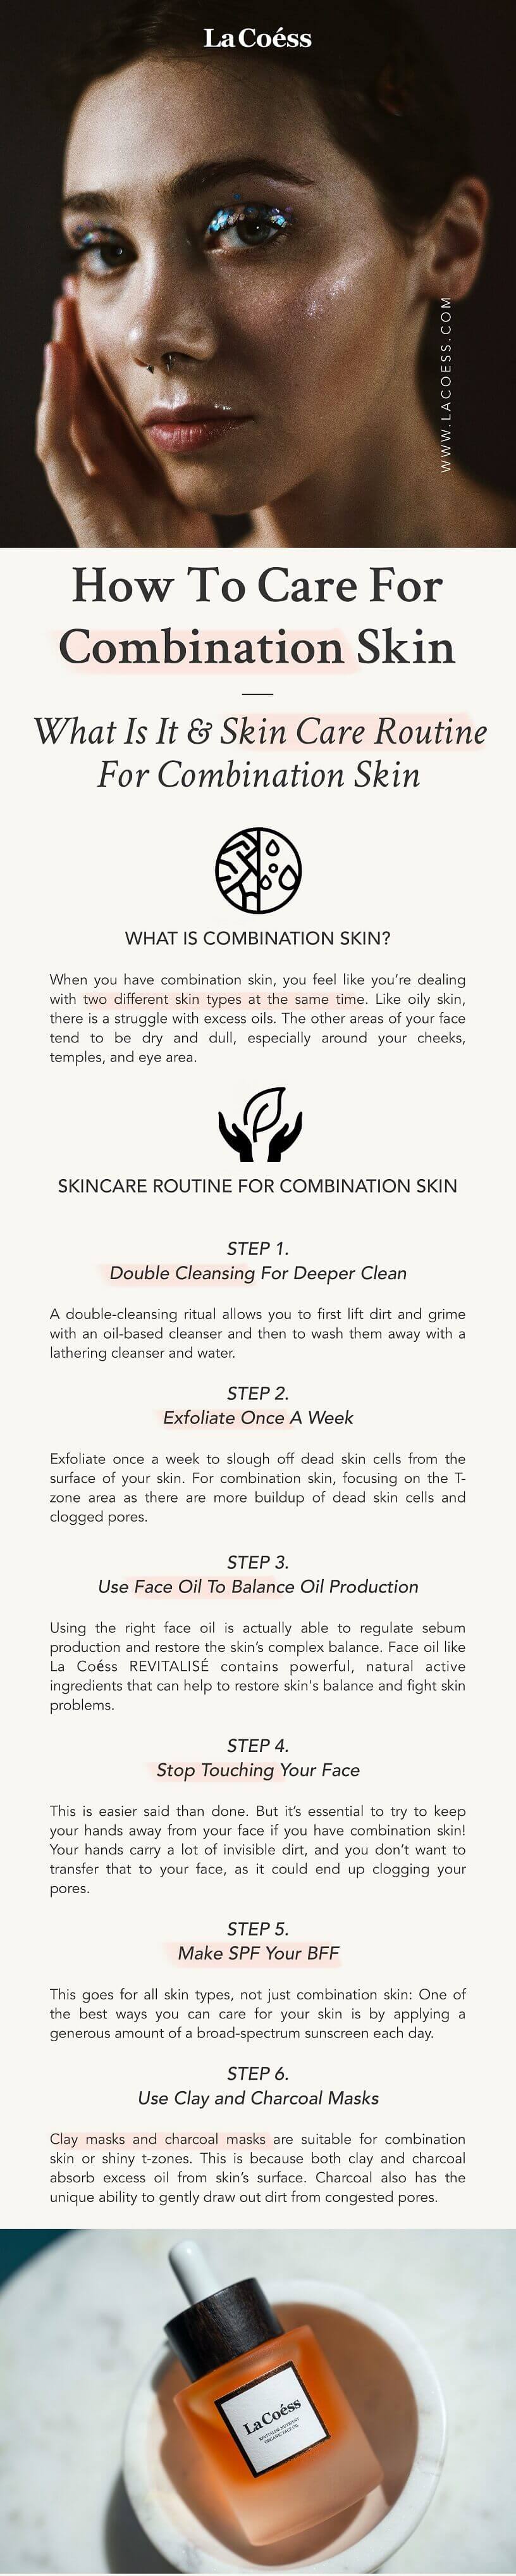 How to Care for Combination Skin